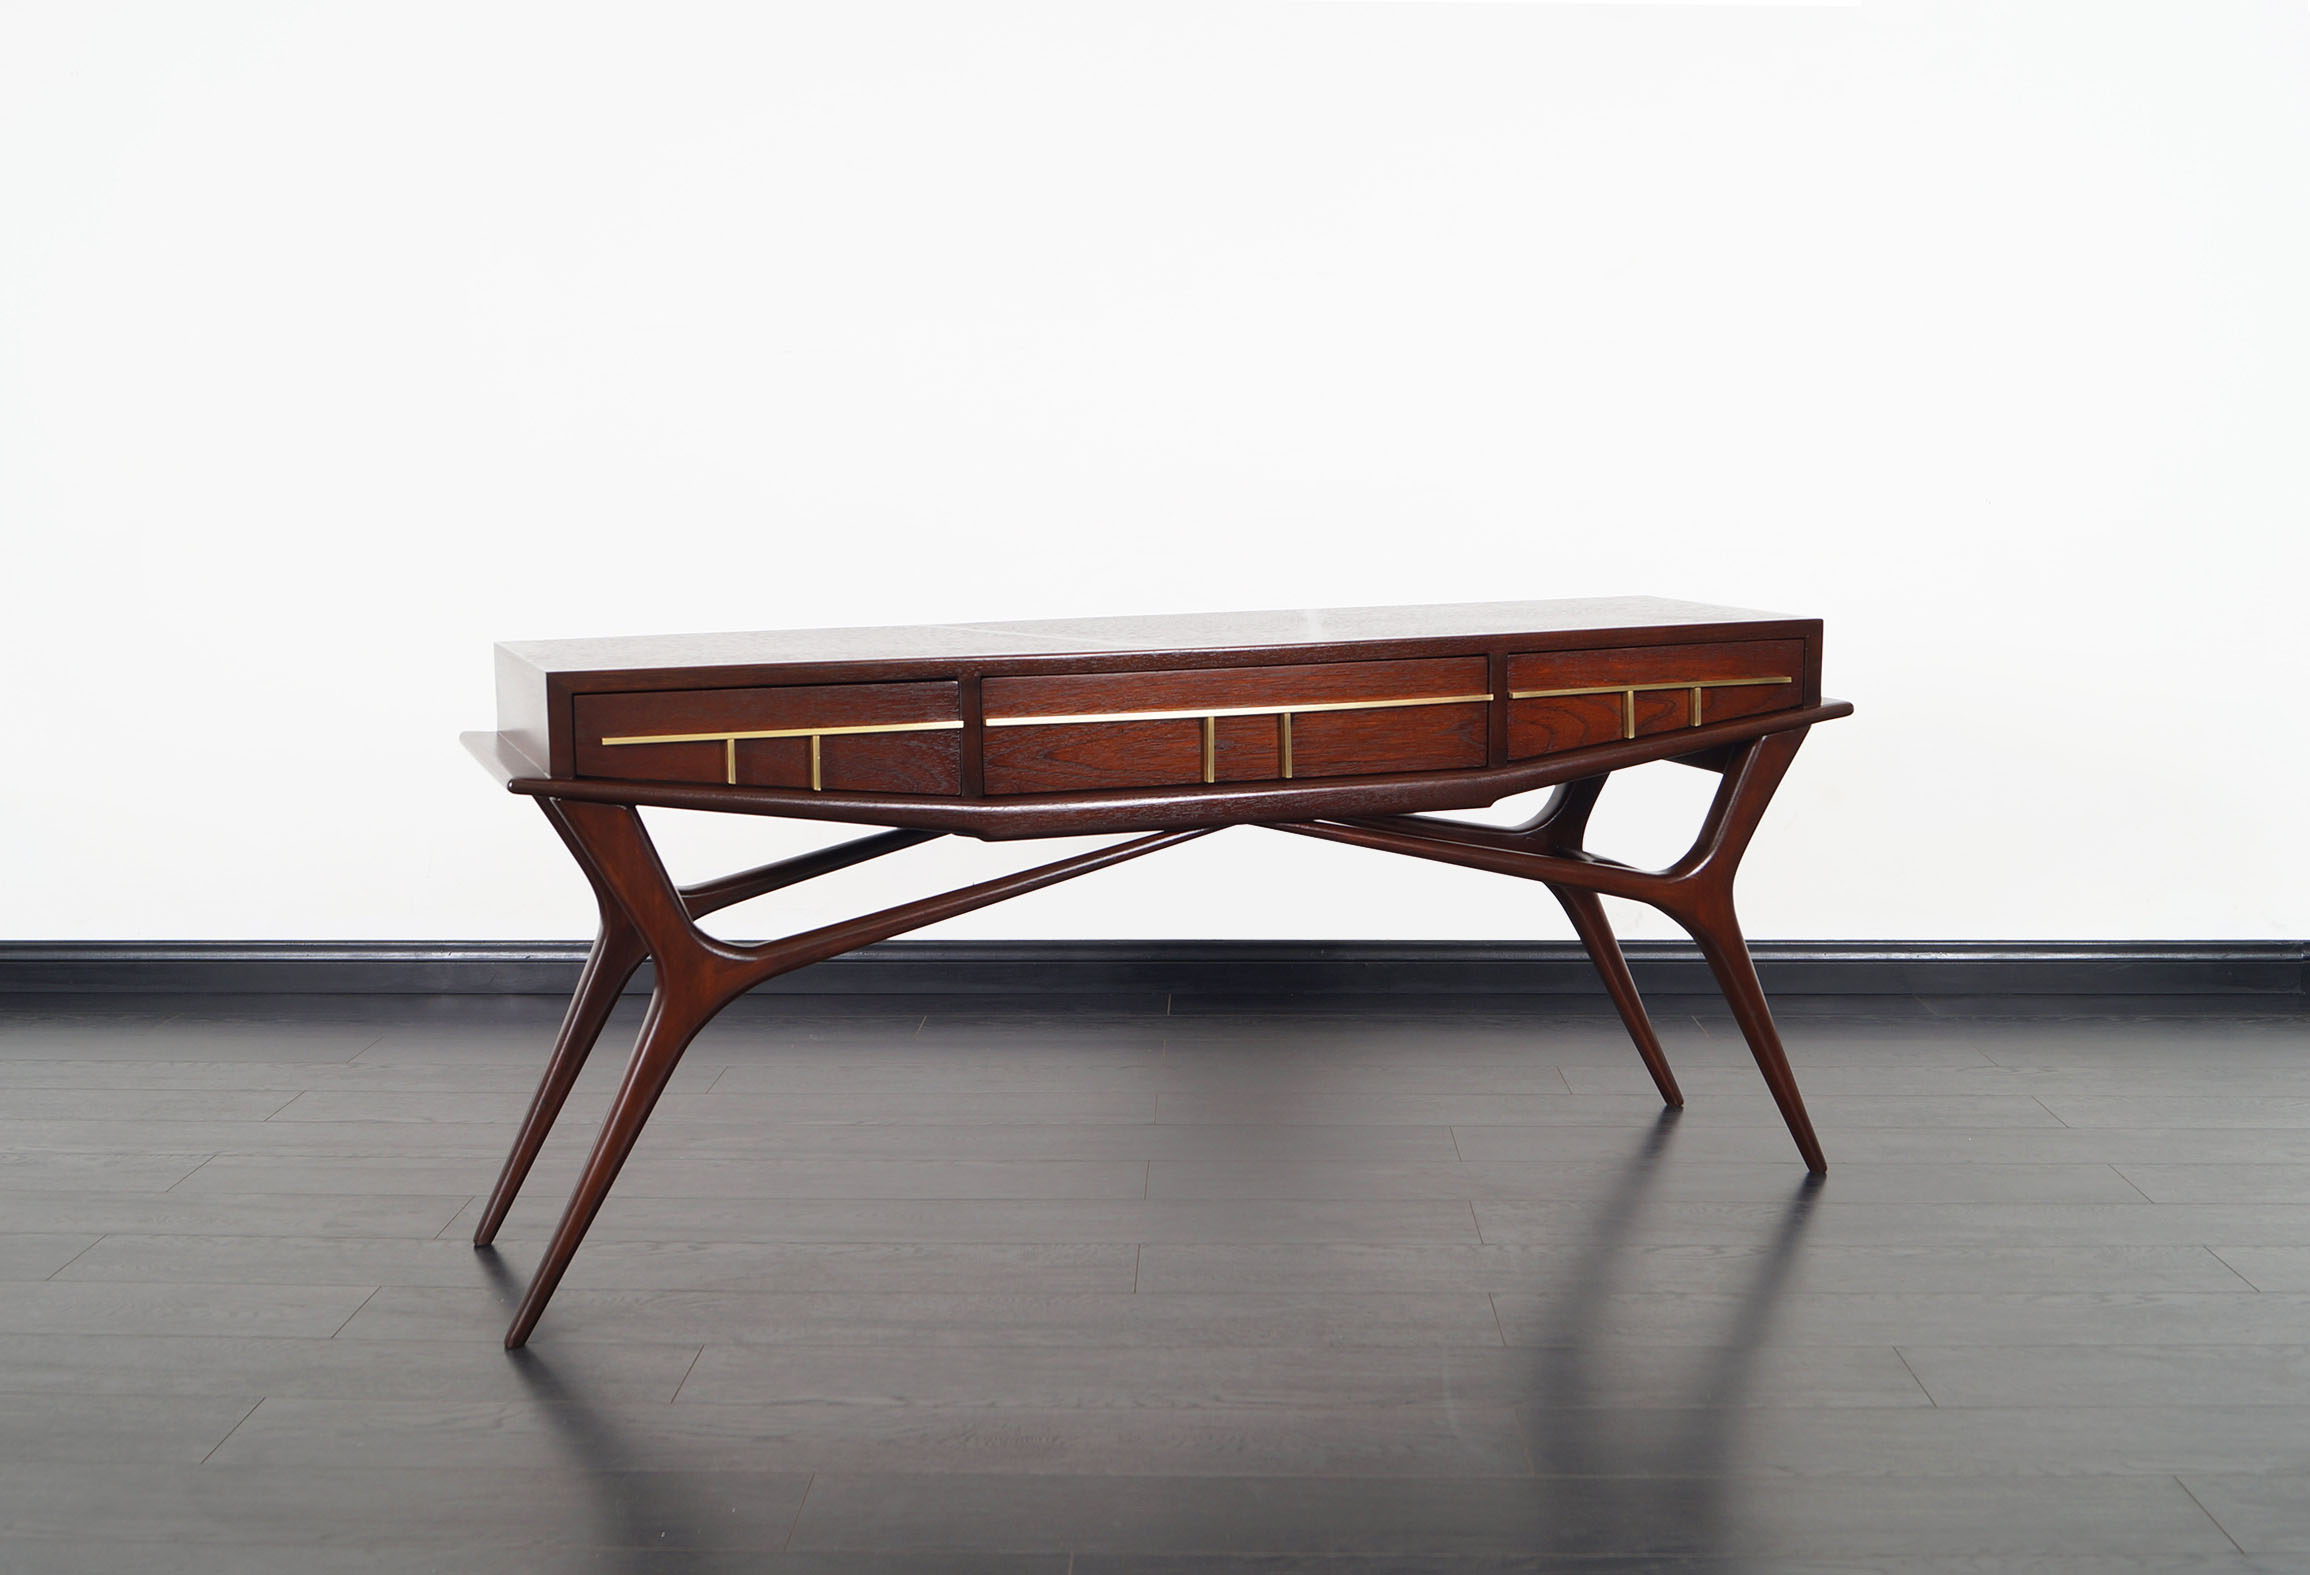 Mexican Modernist Console Table by Frank Kyle